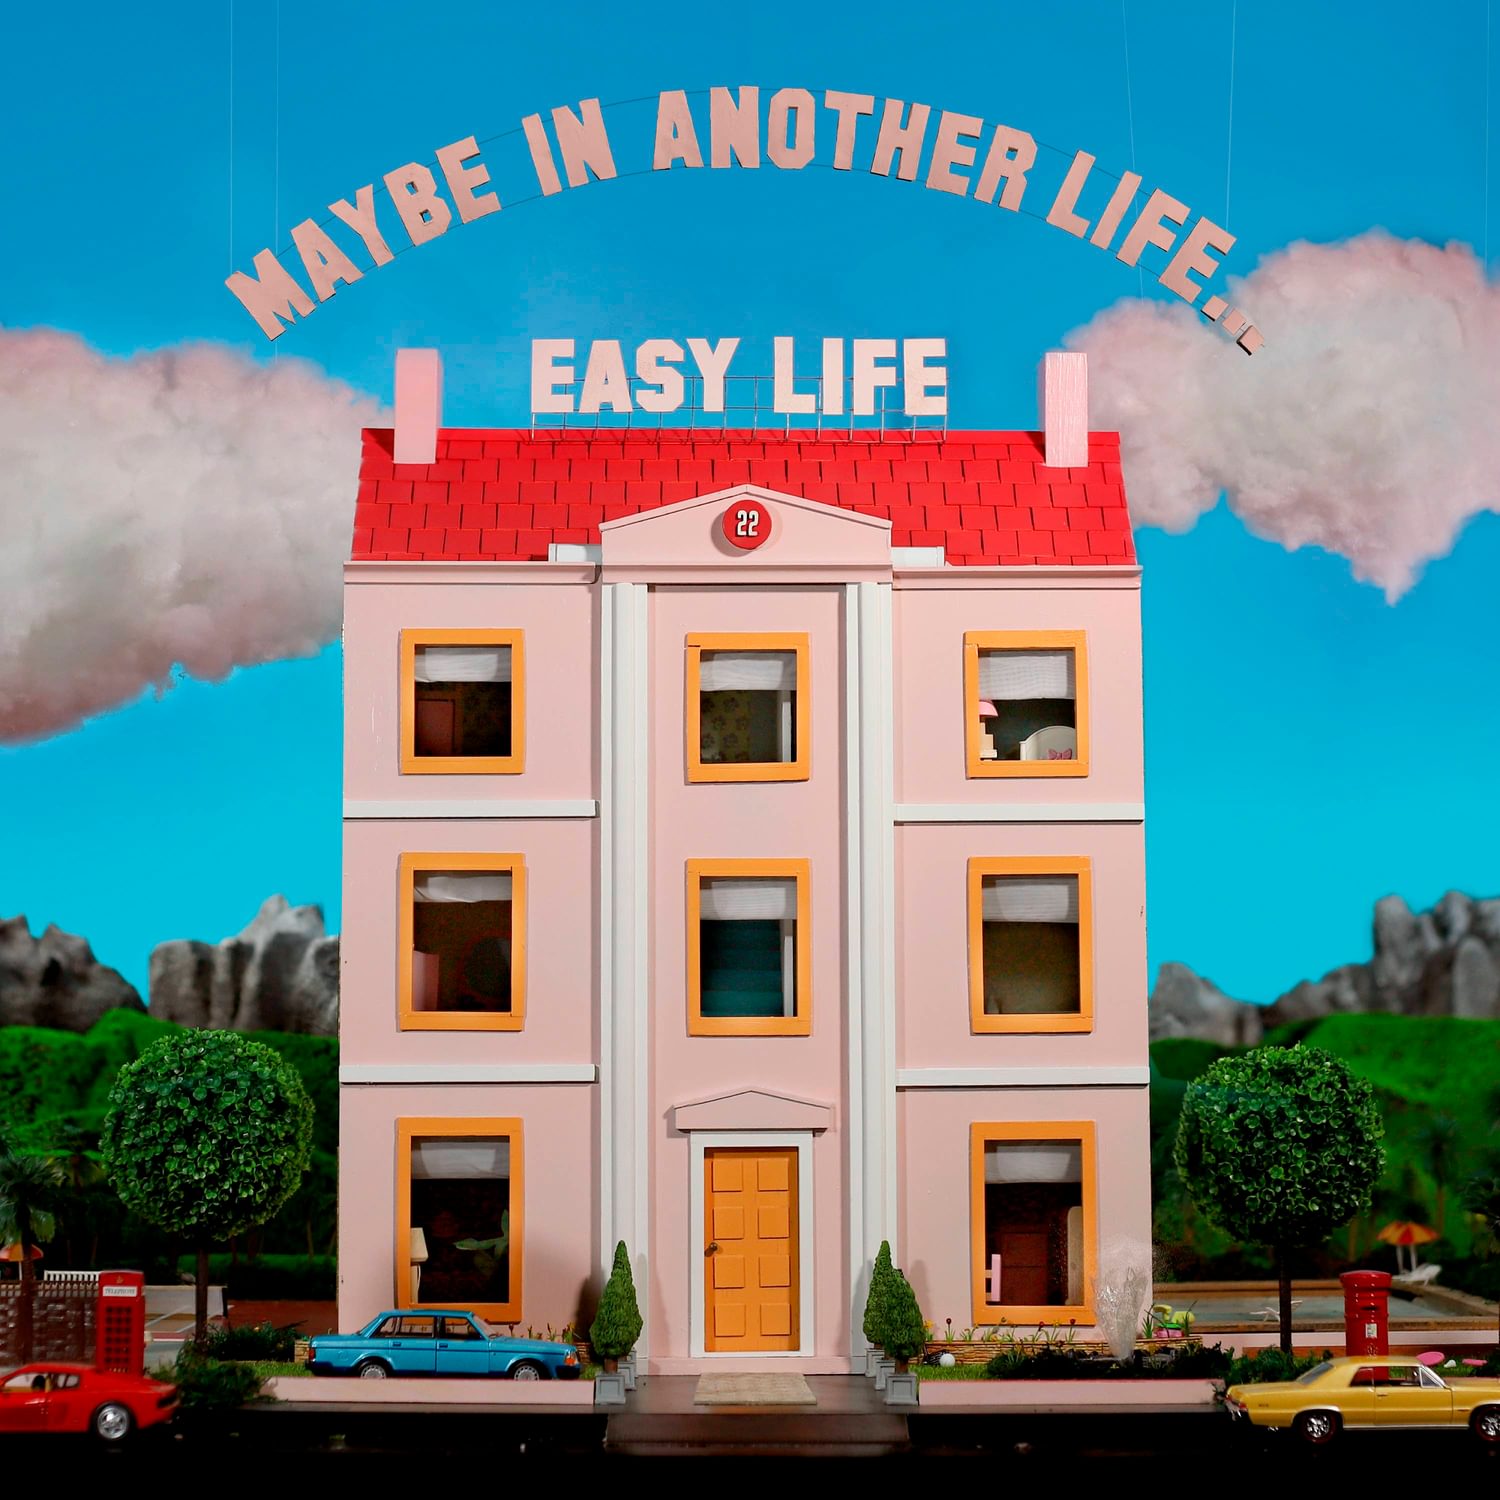 Easy Life - MAYBE IN ANOTHER LIFE…